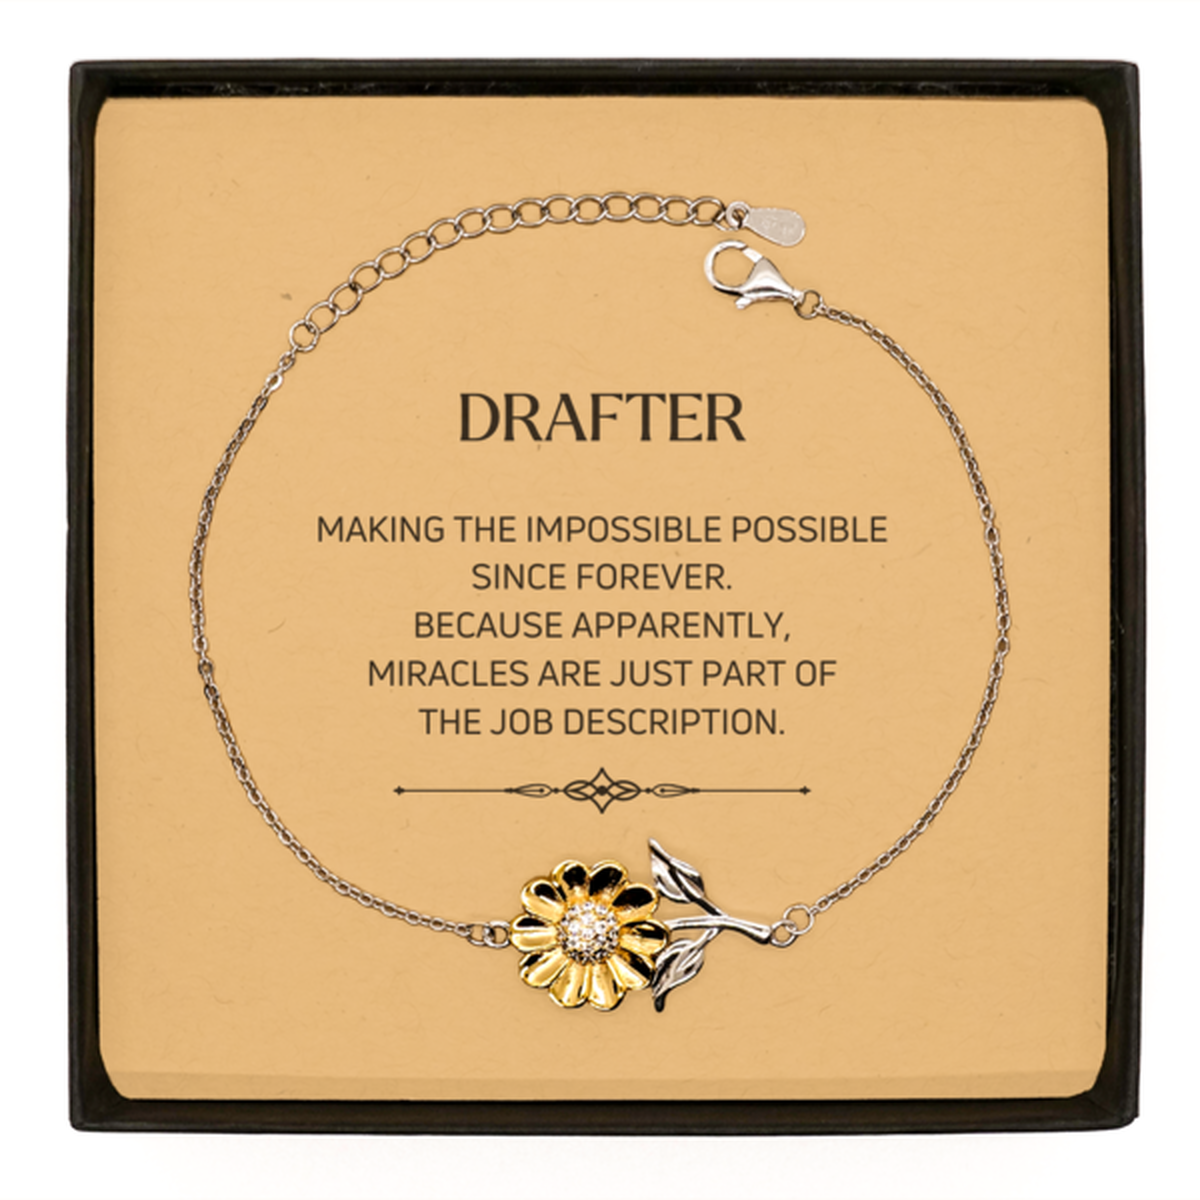 Funny Drafter Gifts, Miracles are just part of the job description, Inspirational Birthday Sunflower Bracelet For Drafter, Men, Women, Coworkers, Friends, Boss